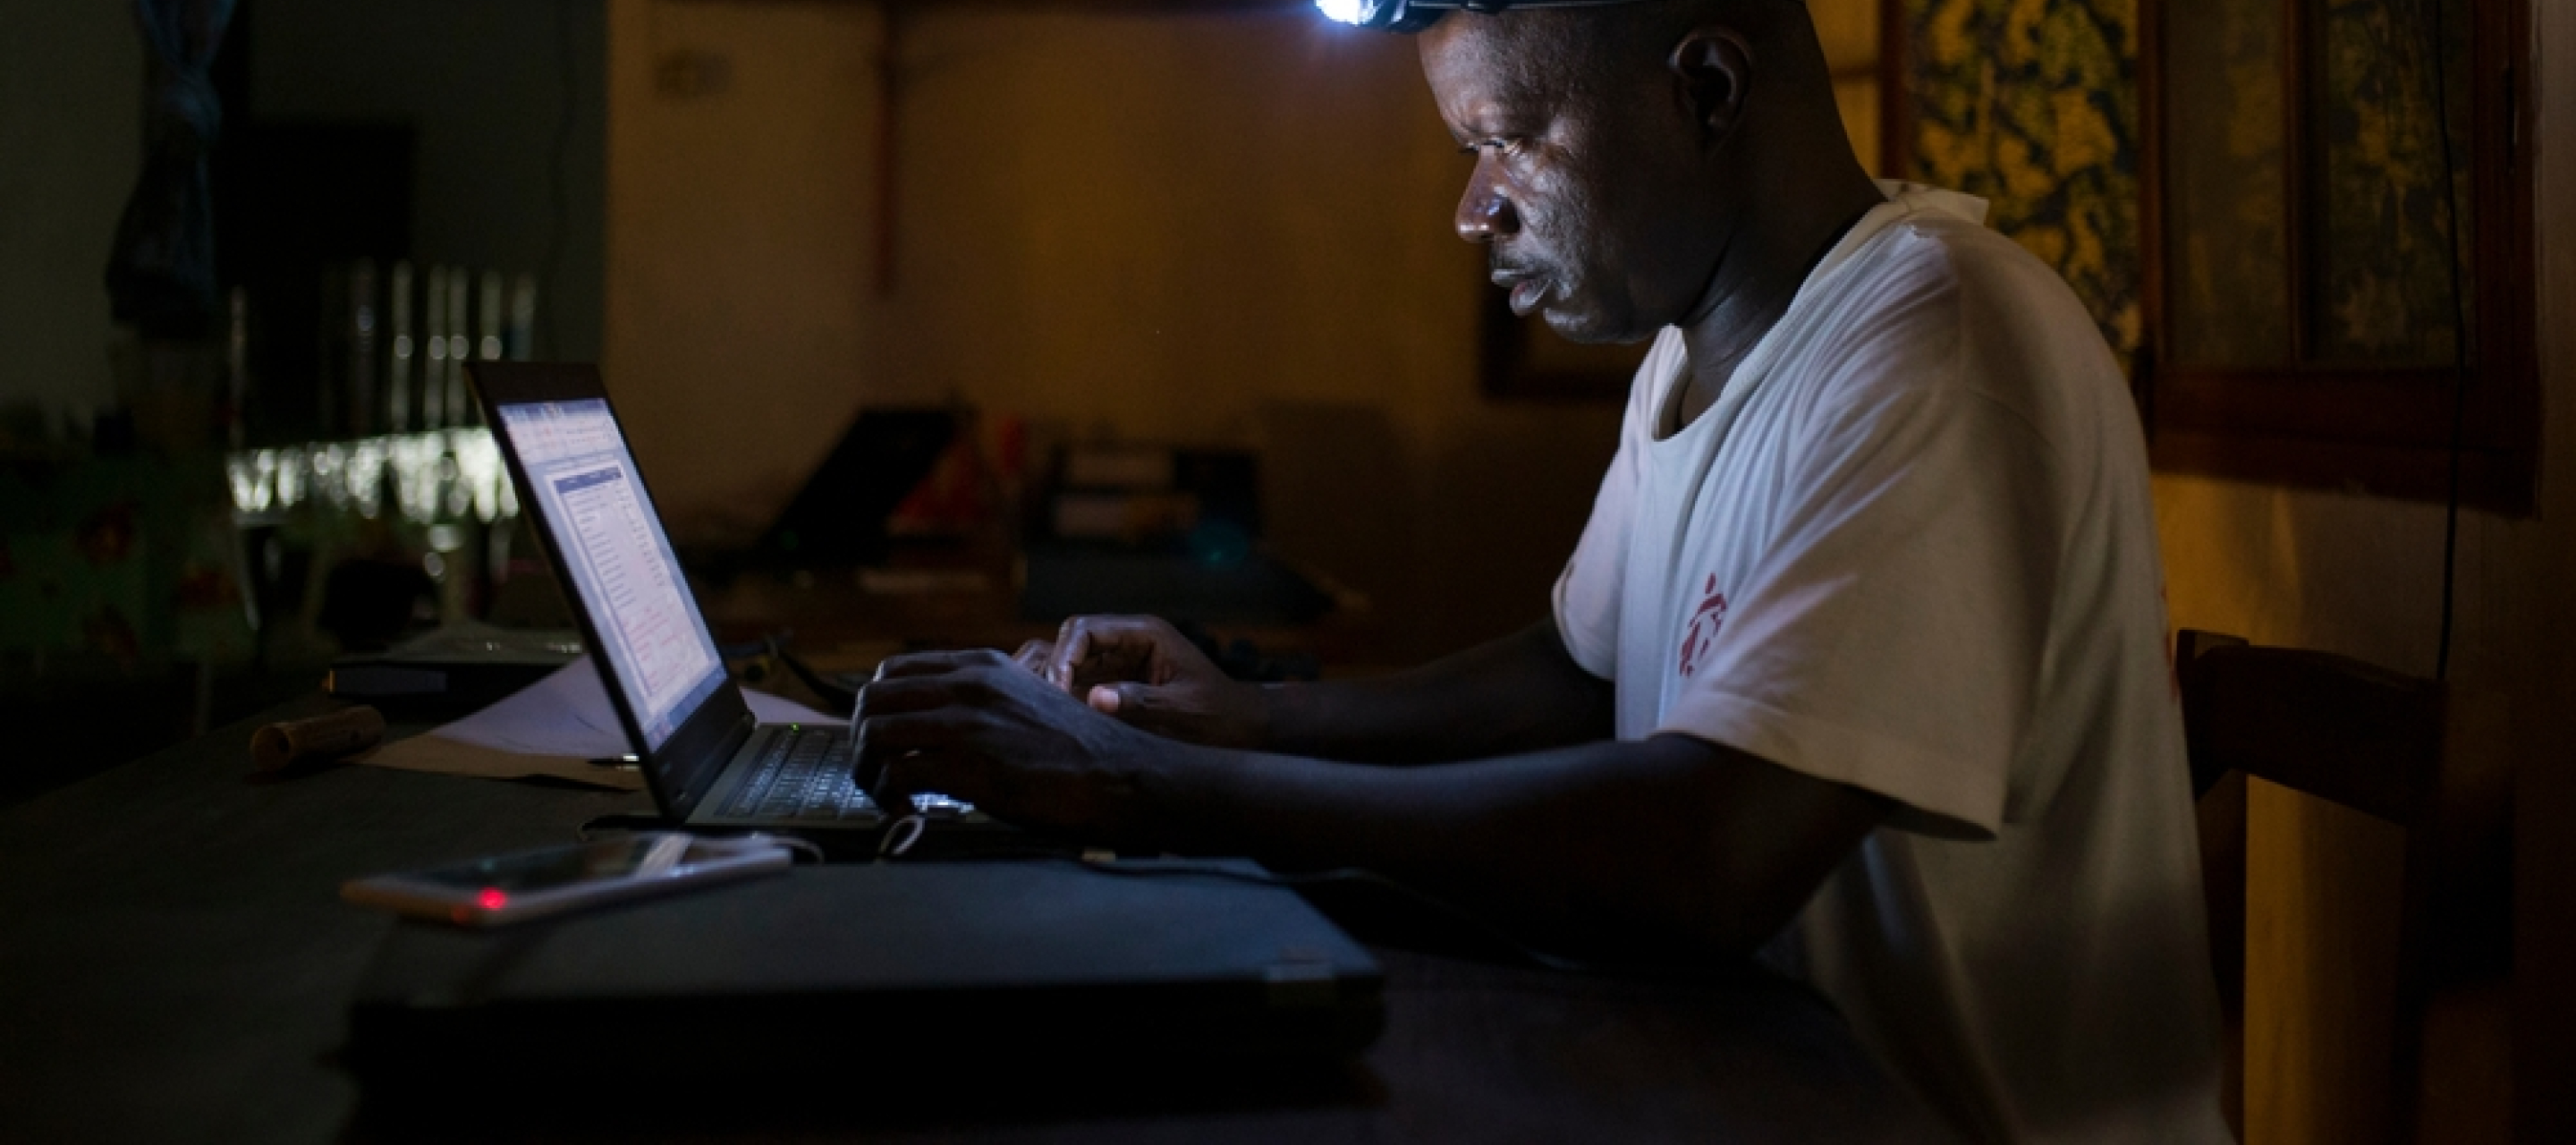 Jean Liyolongo, Head of Monga Intervention, works late into the night at the MSF base, Monga, in Bas-Uele Province, Democratic Republic of Congo.